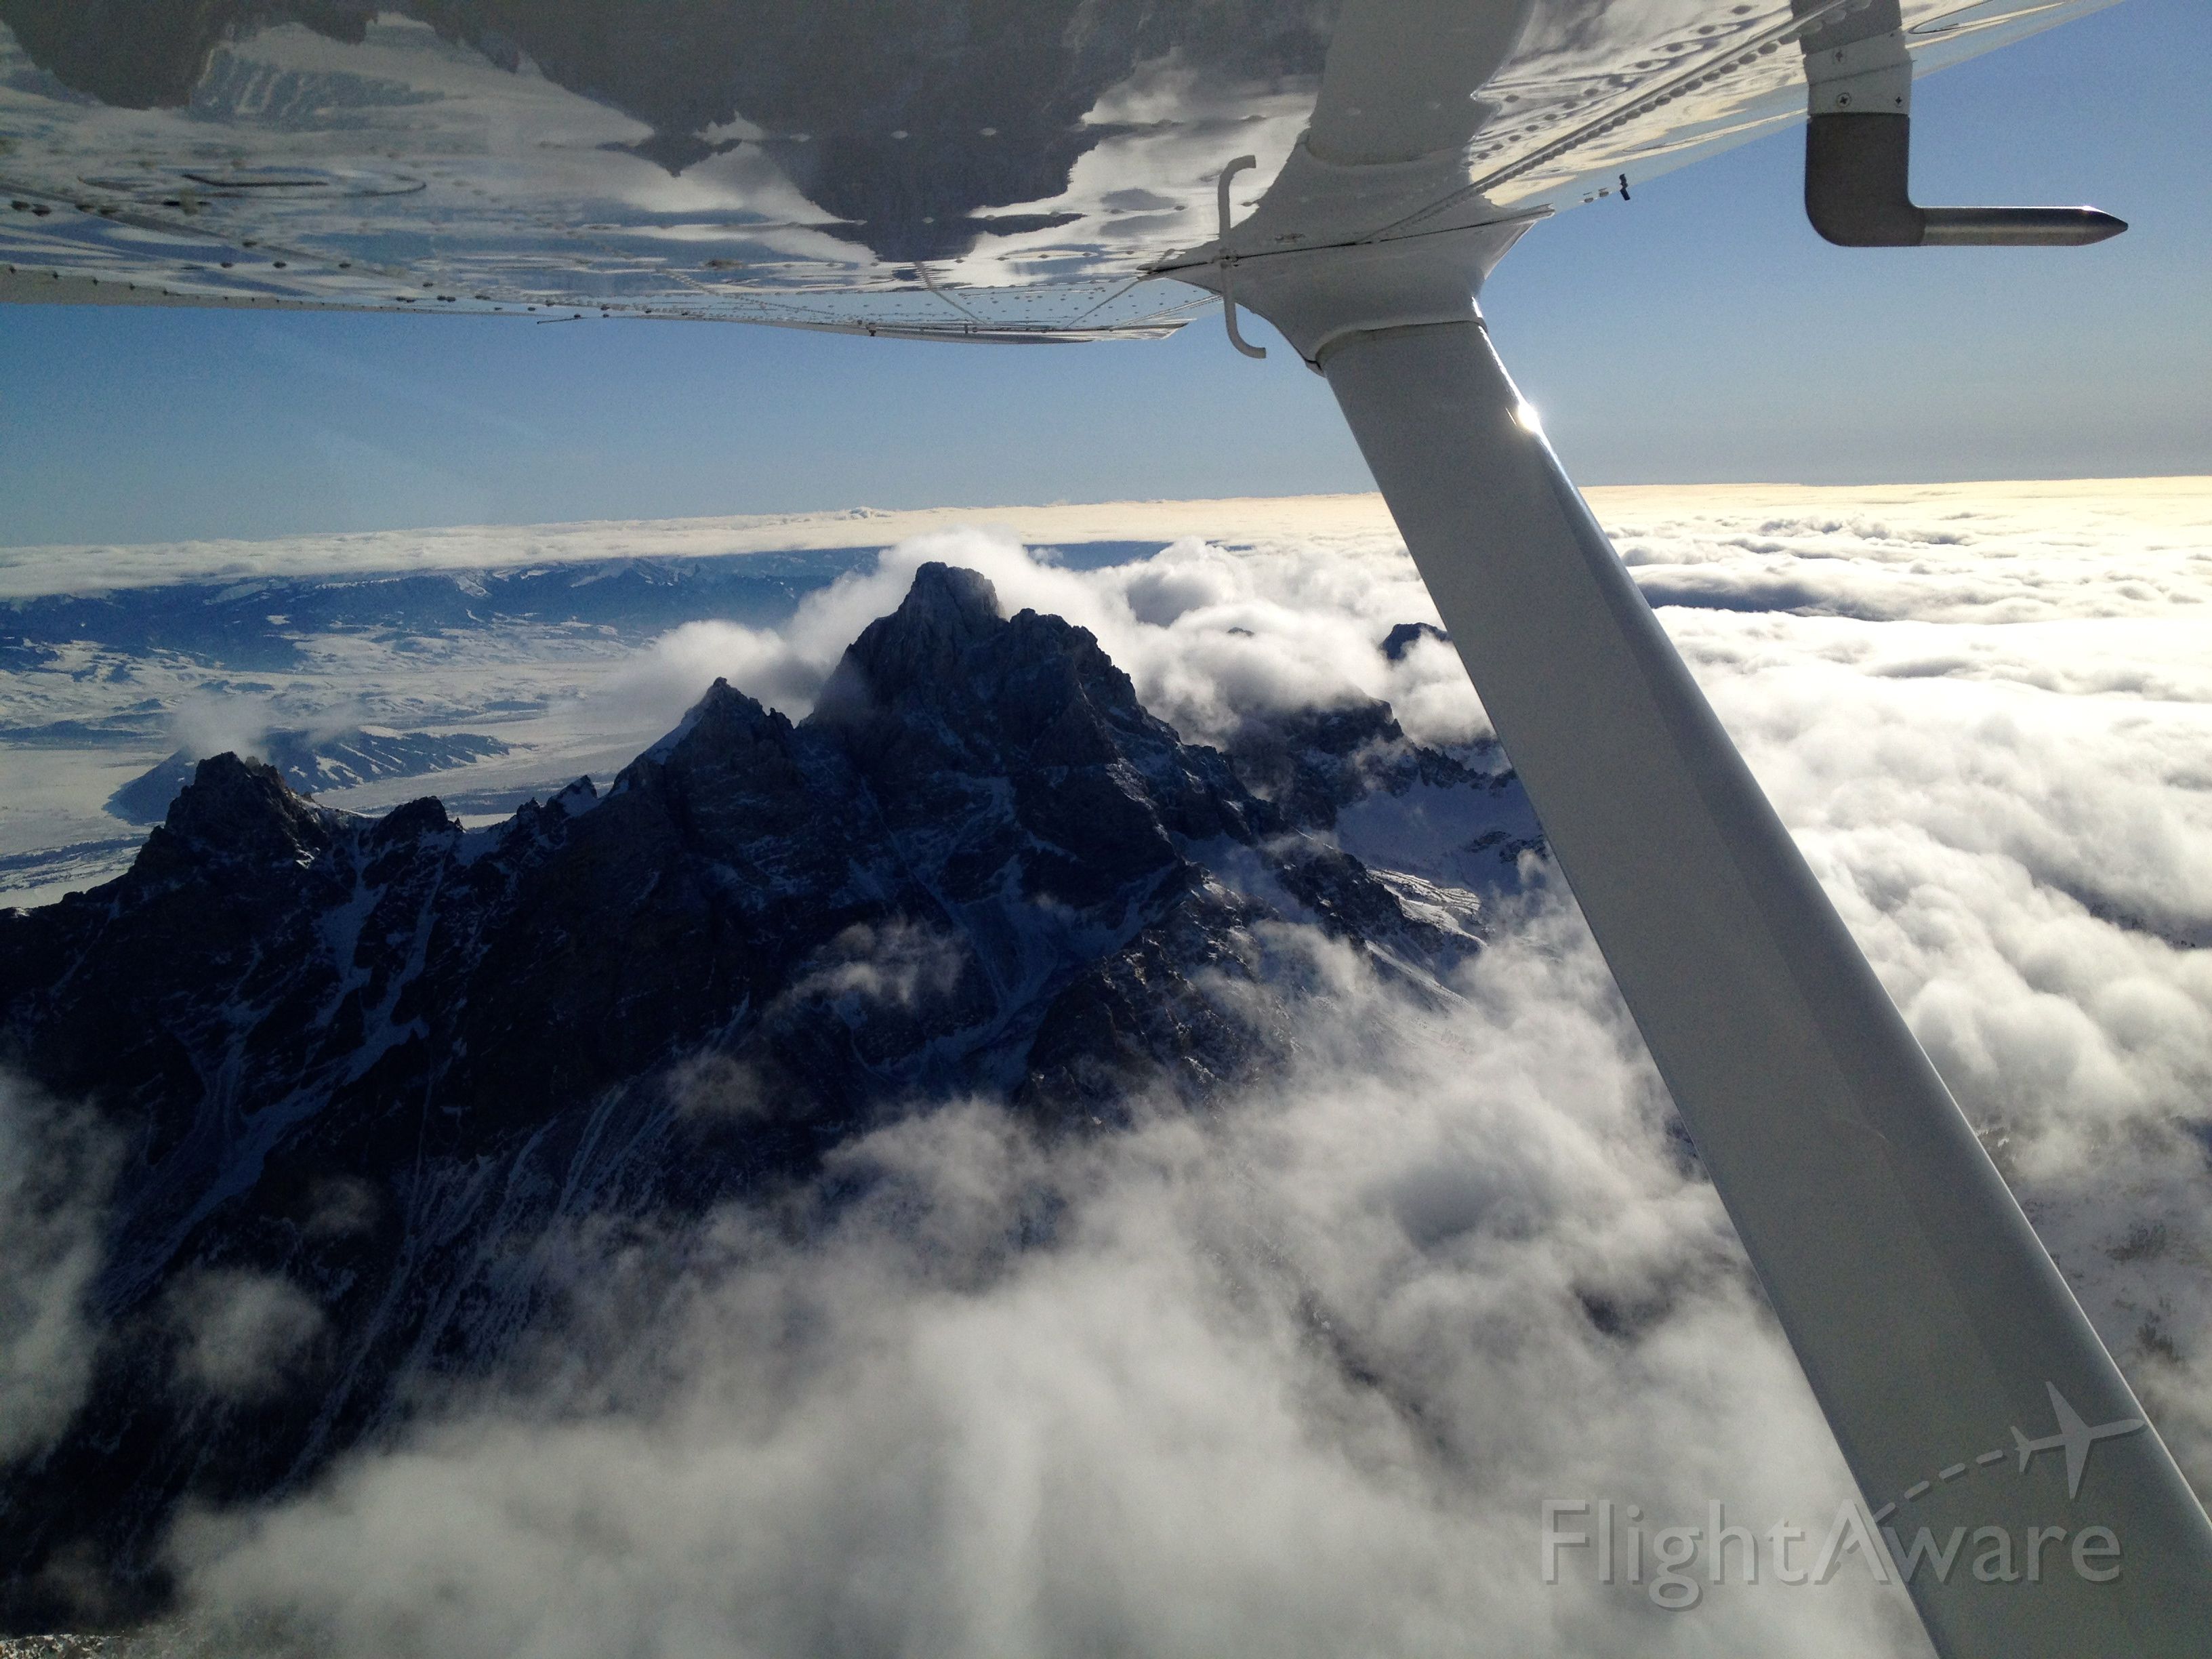 Cessna 206 Stationair (N516RA) - from the west side of the Grand Tetons Jackson, Wy.